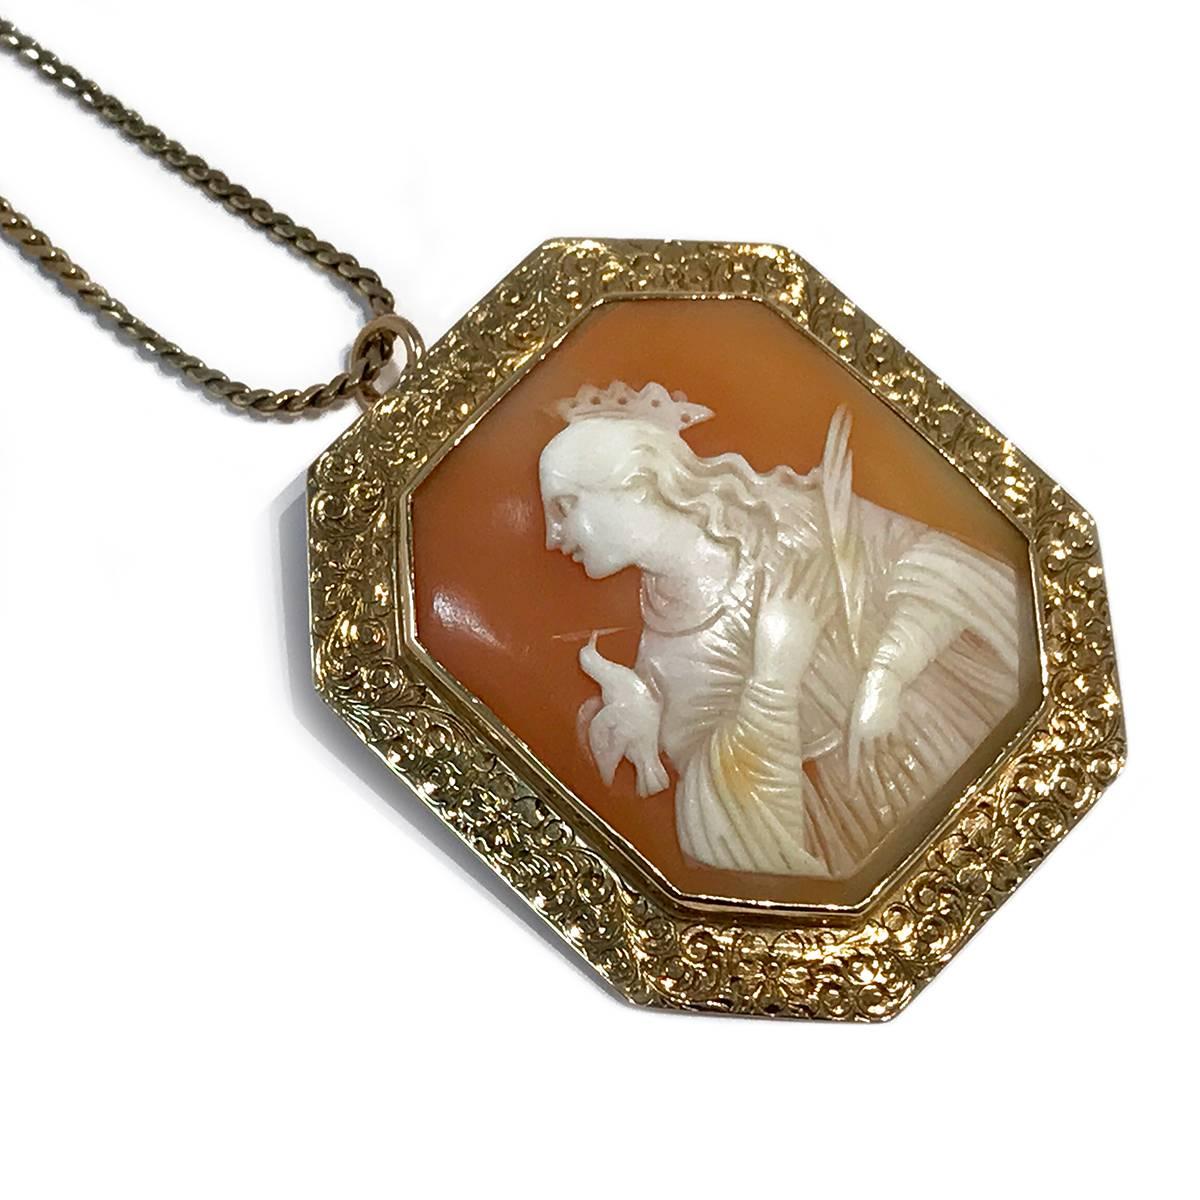 Antique 14k Yellow Gold Carved Shell Octagon Bezel Cameo Brooch Pendant with engraved filigree around bezel. Portrait of a lady holding a feather and a dove on her shoulder. The size of brooch pendant is approximately 43mm x 49mm. Brooch Pendant